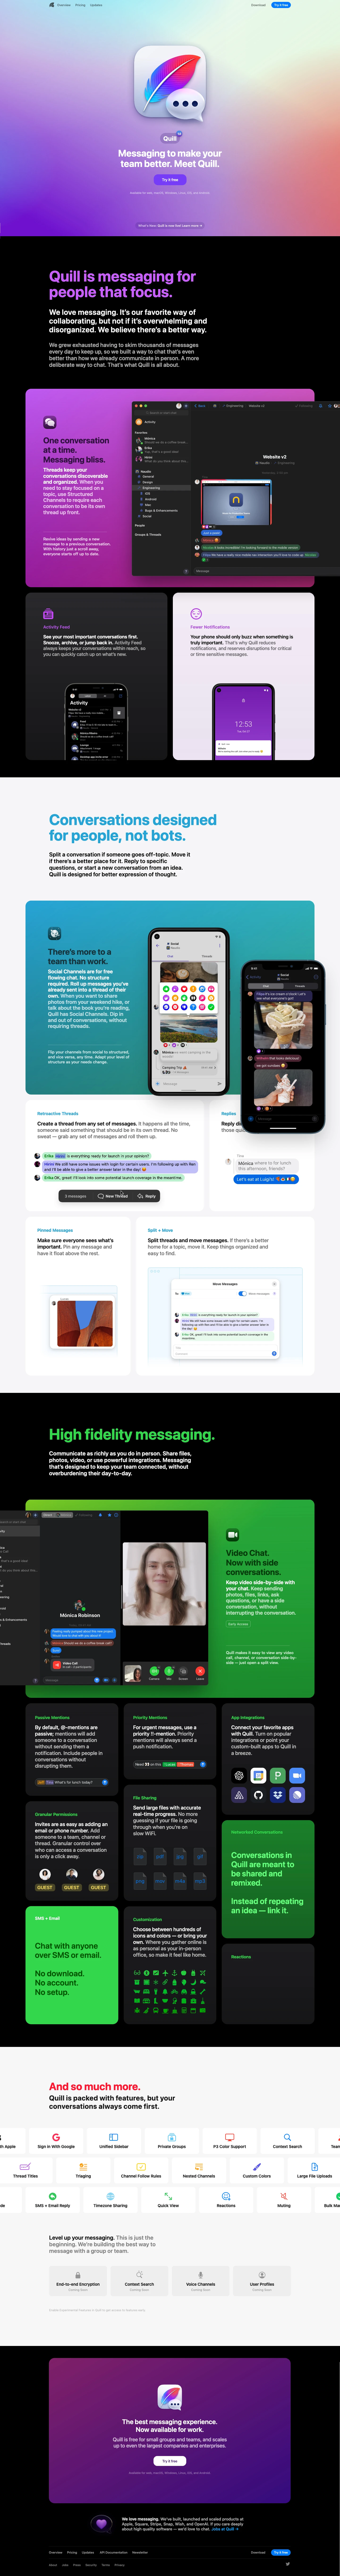 Quill Landing Page Example: Quill is the best way to message with a team or group. Built for productivity and focus, Quill reduces notifications, collects conversations into threads, and gets out of your way — so you can get back to doing what you do best